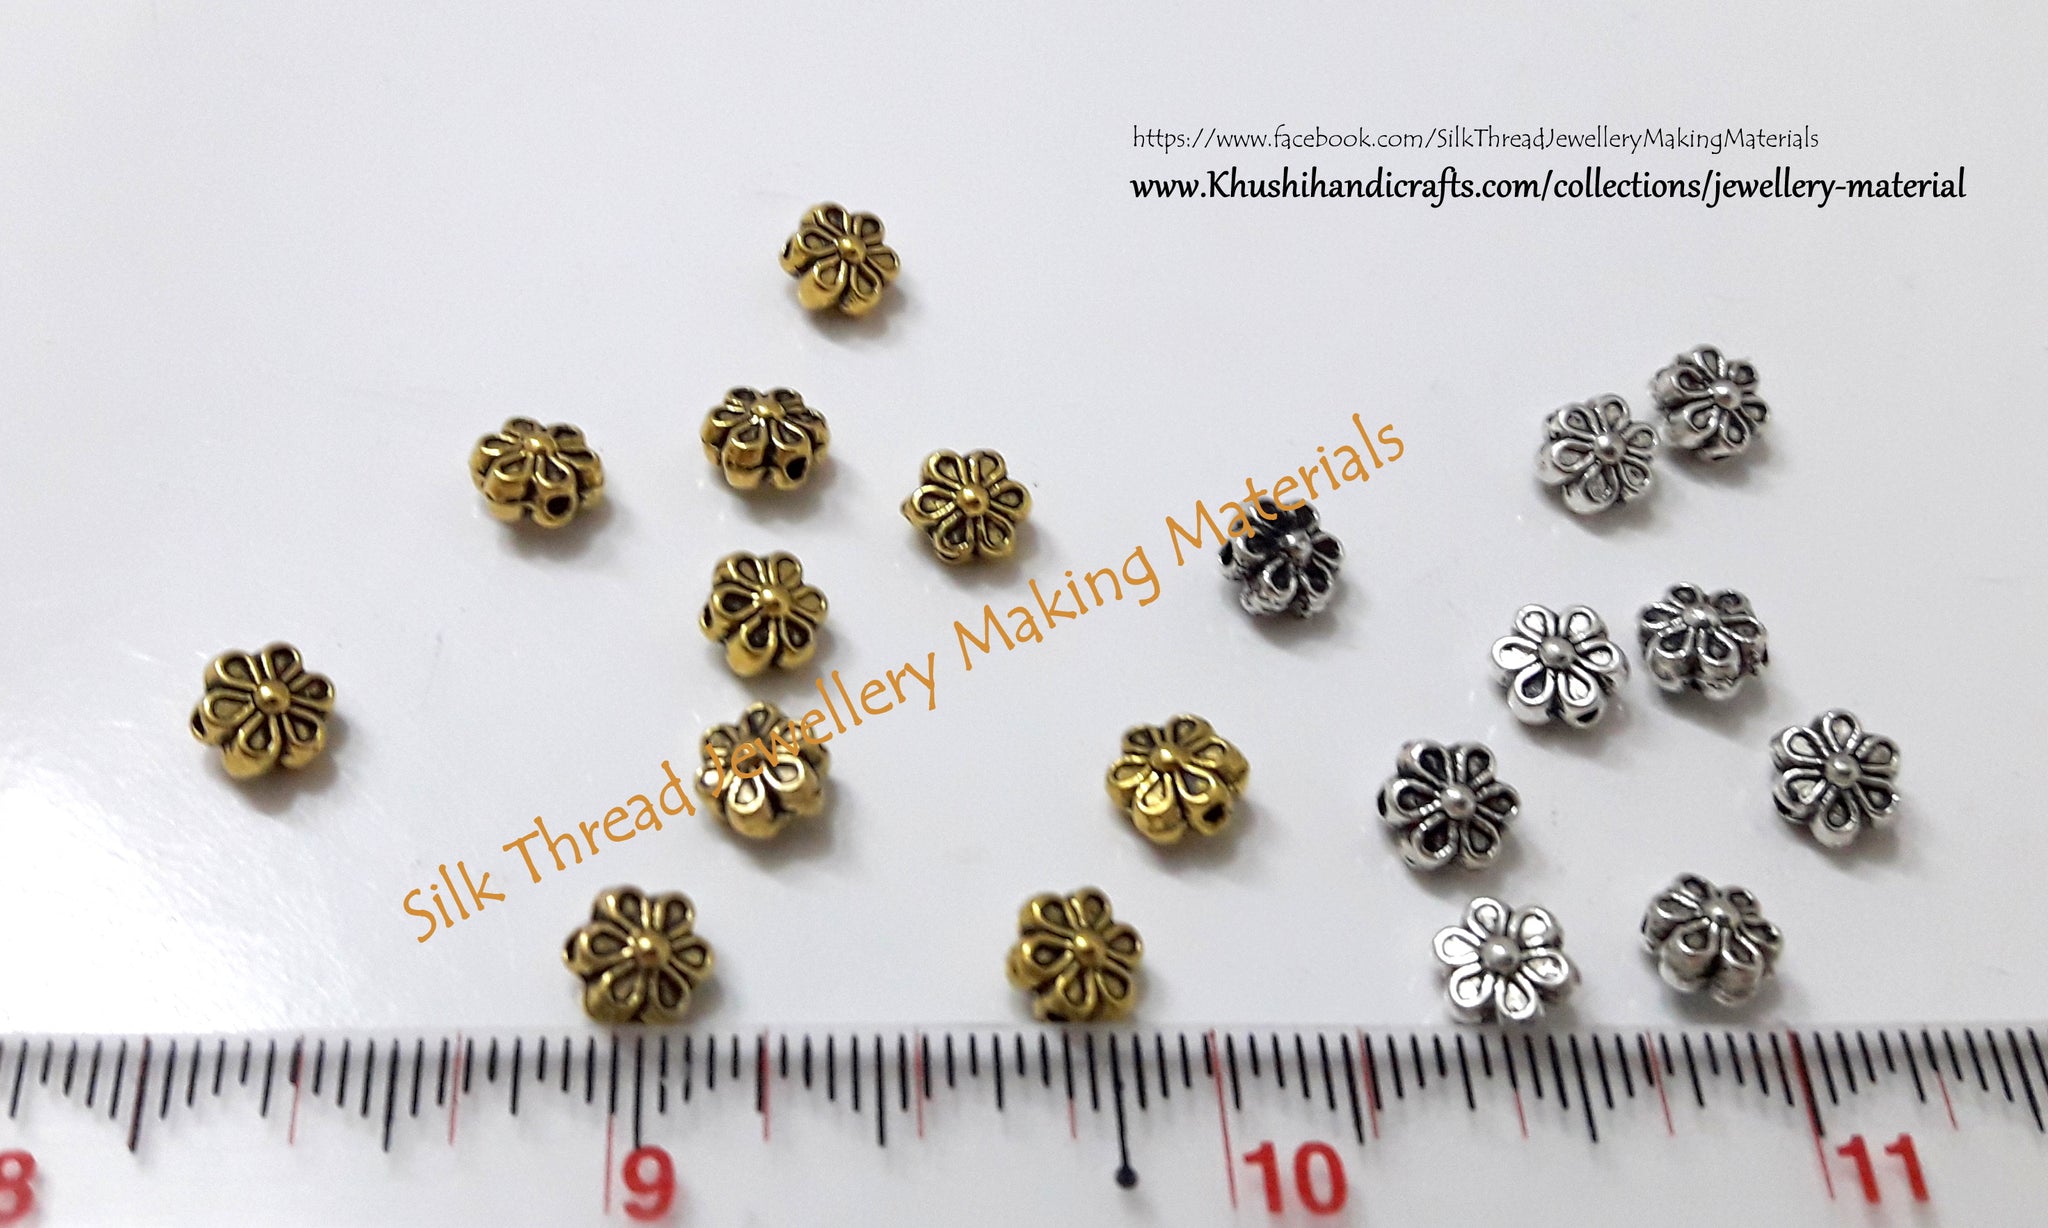 Gold and Silver Flower spacer beads